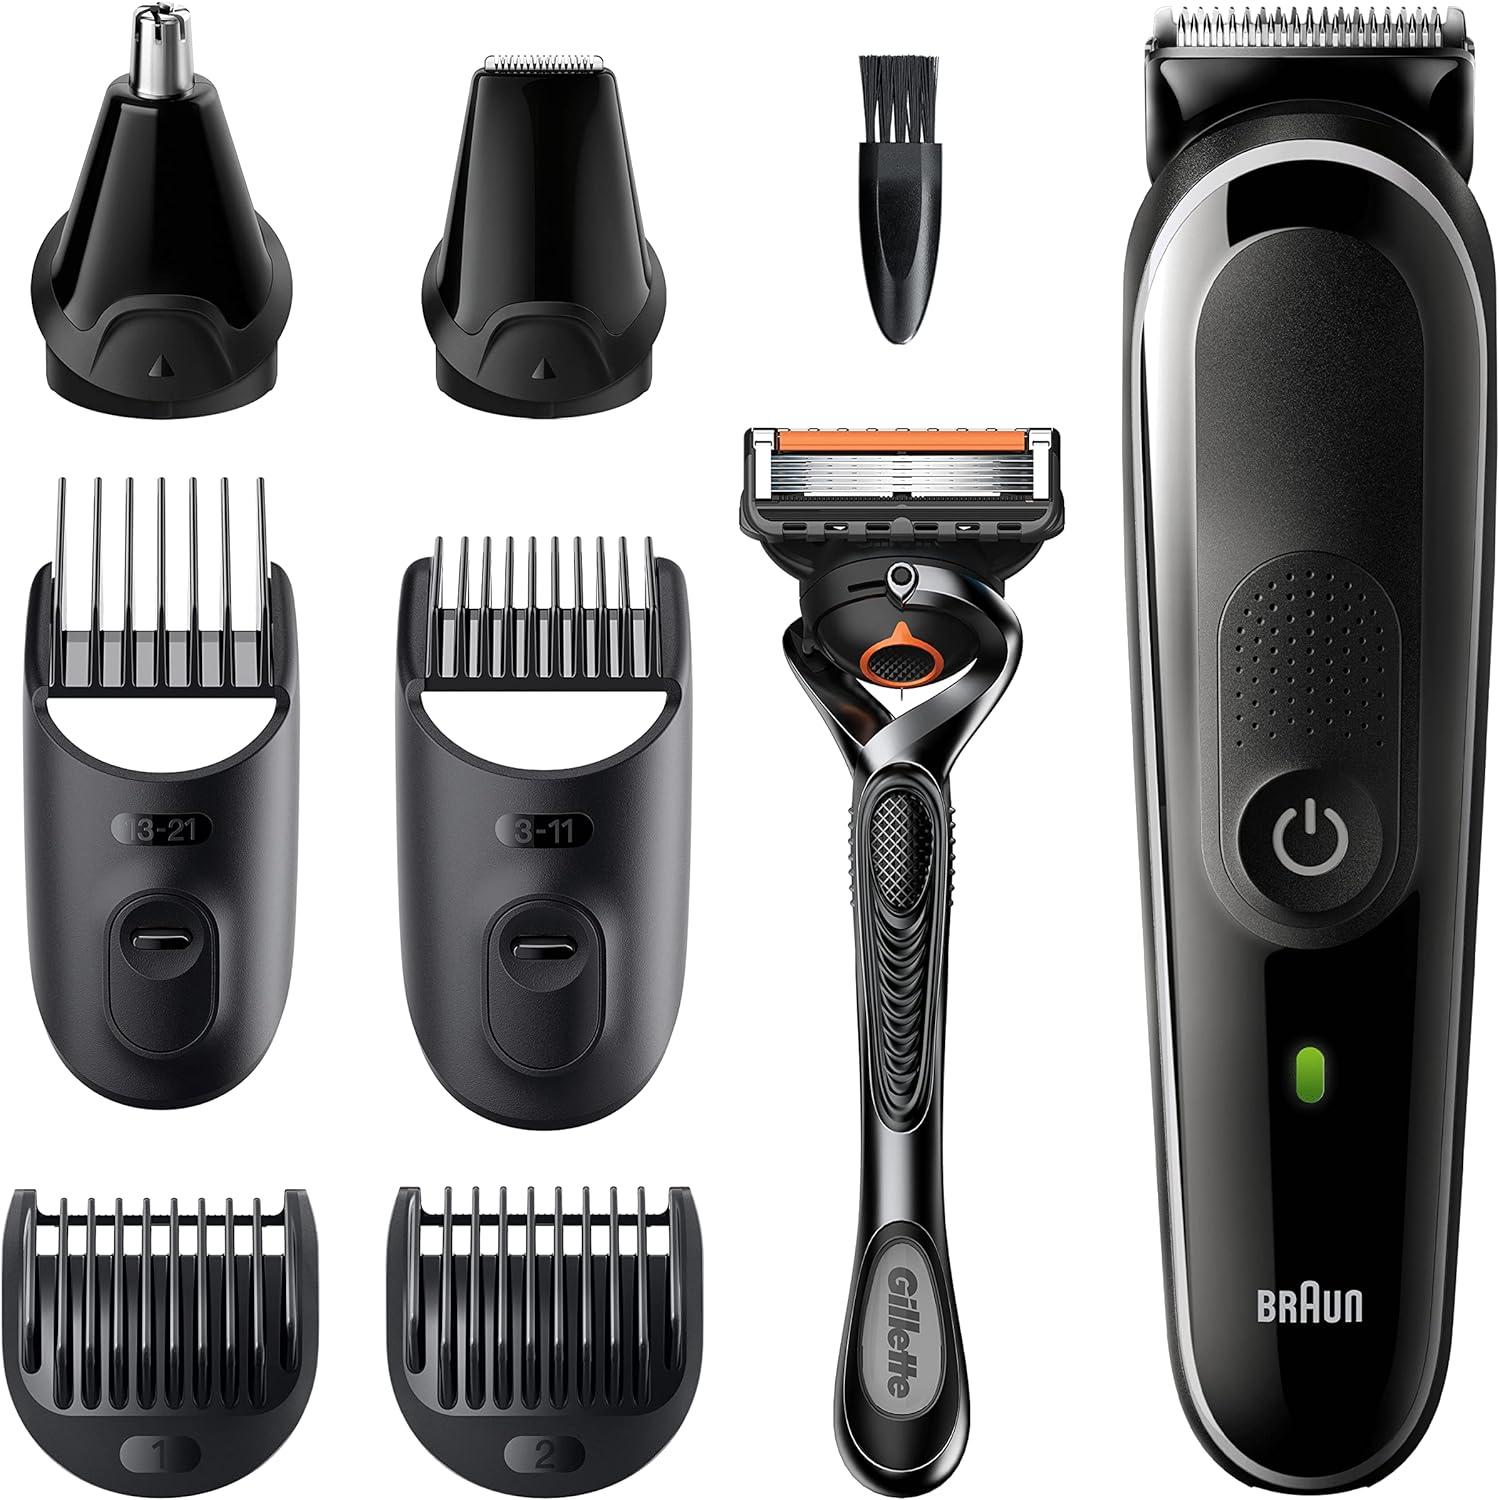 8-In-1 Series Braun & UK Pin Gillette Nose Razor 2 Kit Clippers Ear & With Male Black/Grey Men Trimmer Trimmer MGK5260 Plug 6 For Hair Attachments Gifts All-In-One Grooming 5 Beard